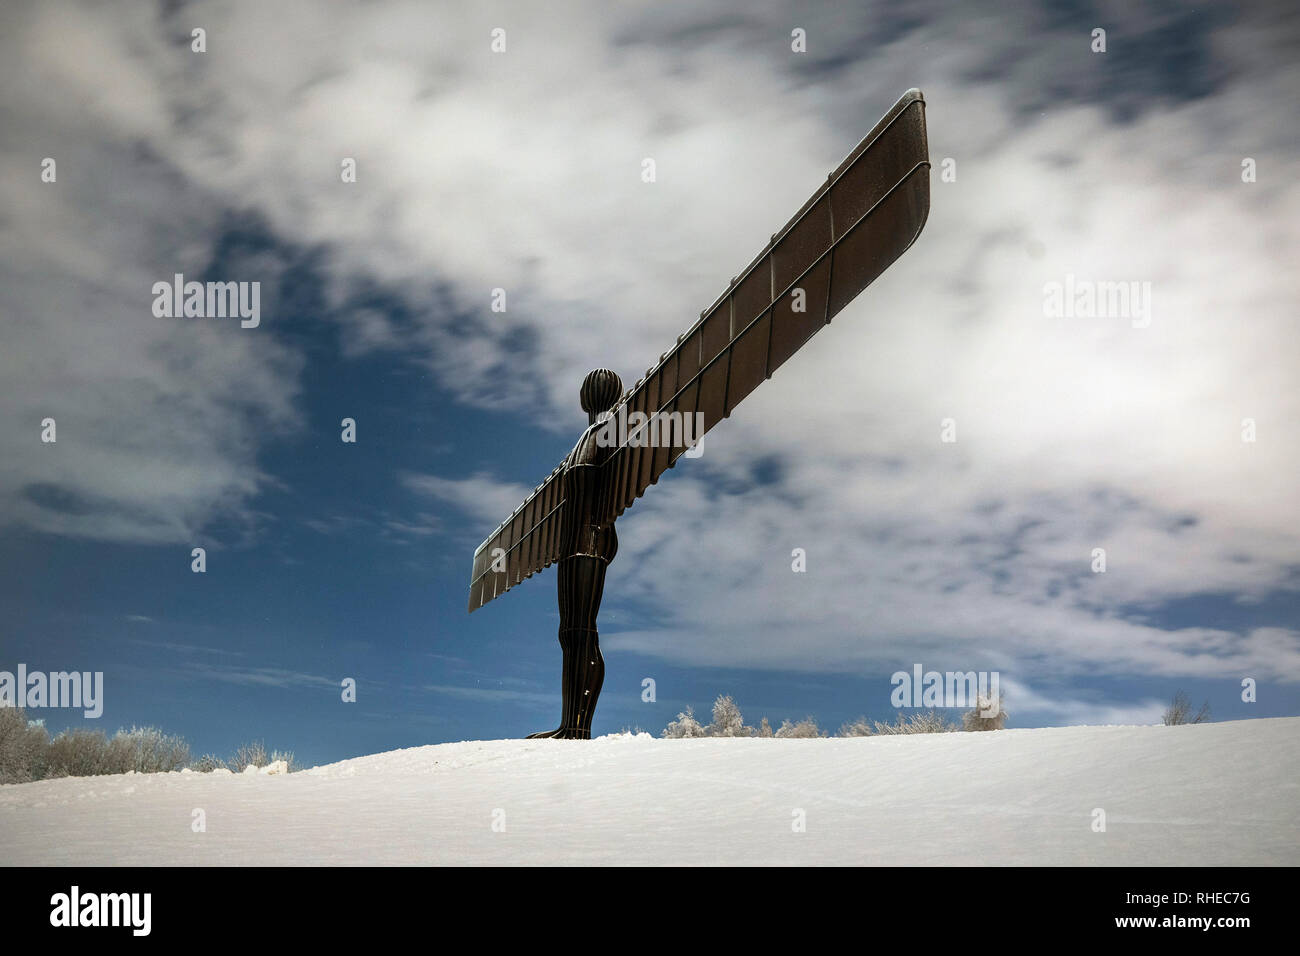 A time exposure of the Angel of the North in Gateshead, taken at 02:56hrs Saturday, after snowfall on Friday and overnight are expected to bring widespread disruption. Stock Photo